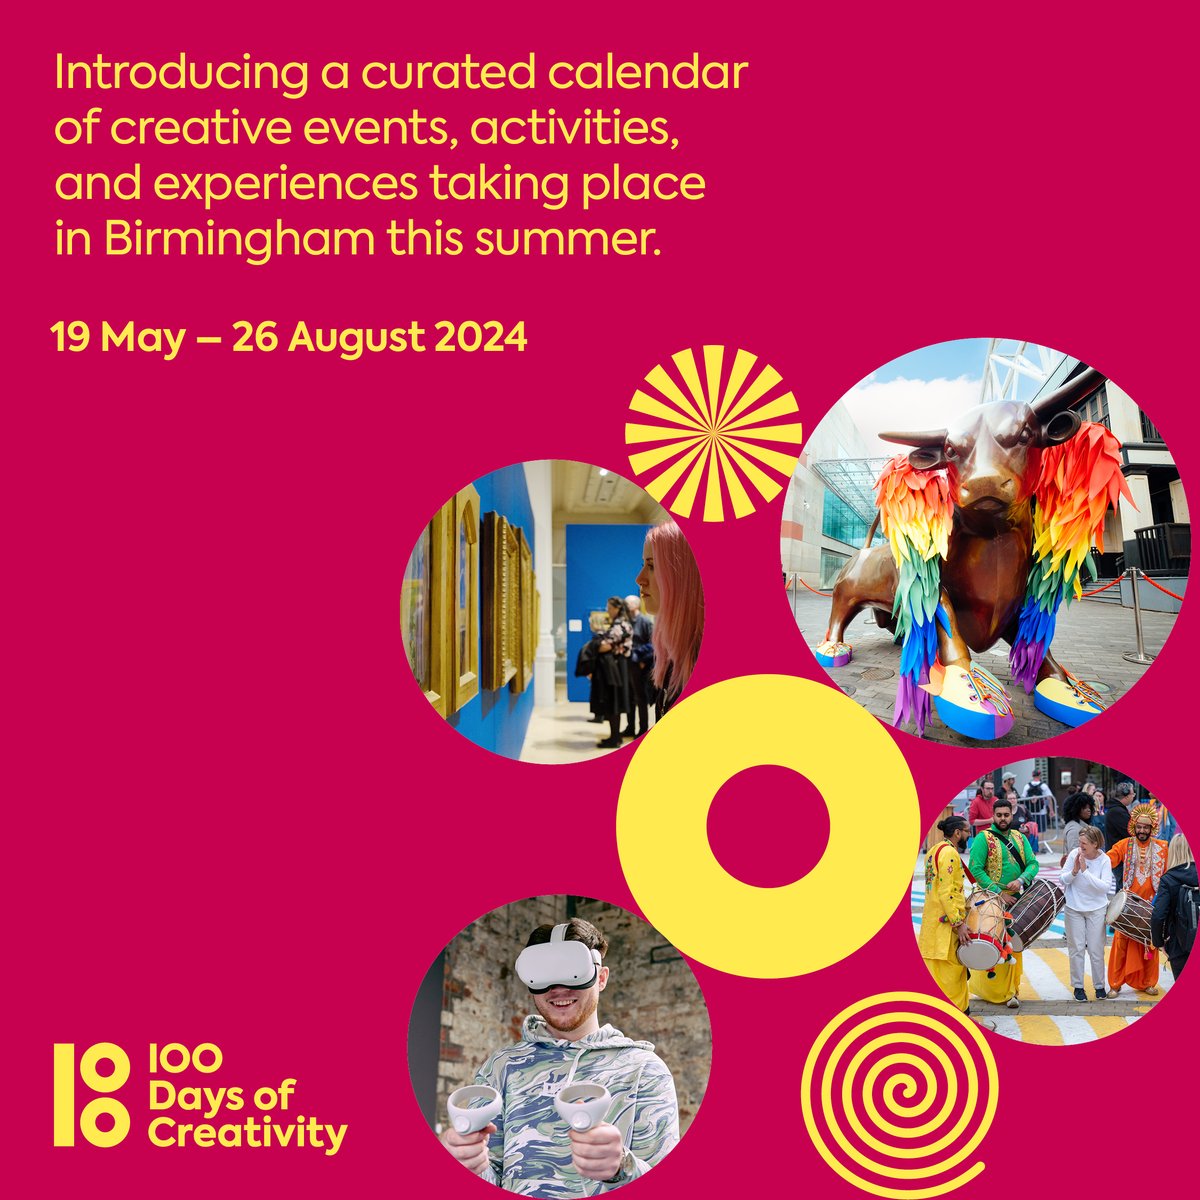 We're part of #100daysofcreativity! A curated calendar of creative events, activities and experiences taking place in Birmingham from 19 May – 26 August. Find out more about the programme and our chosen events 👉 bit.ly/4dlFS5q